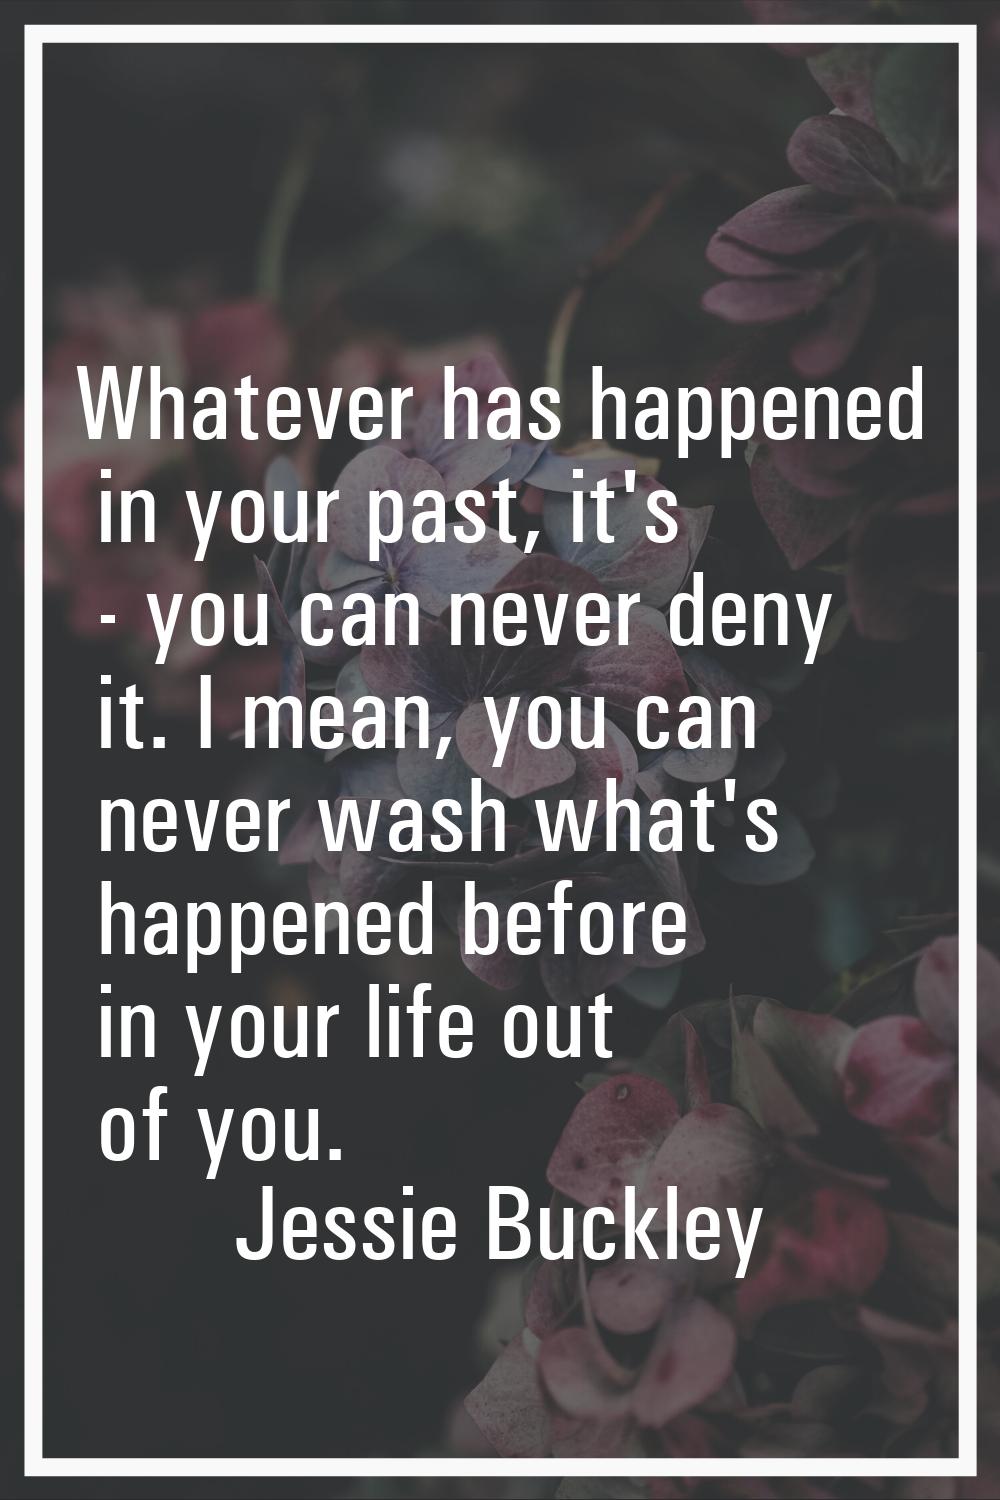 Whatever has happened in your past, it's - you can never deny it. I mean, you can never wash what's